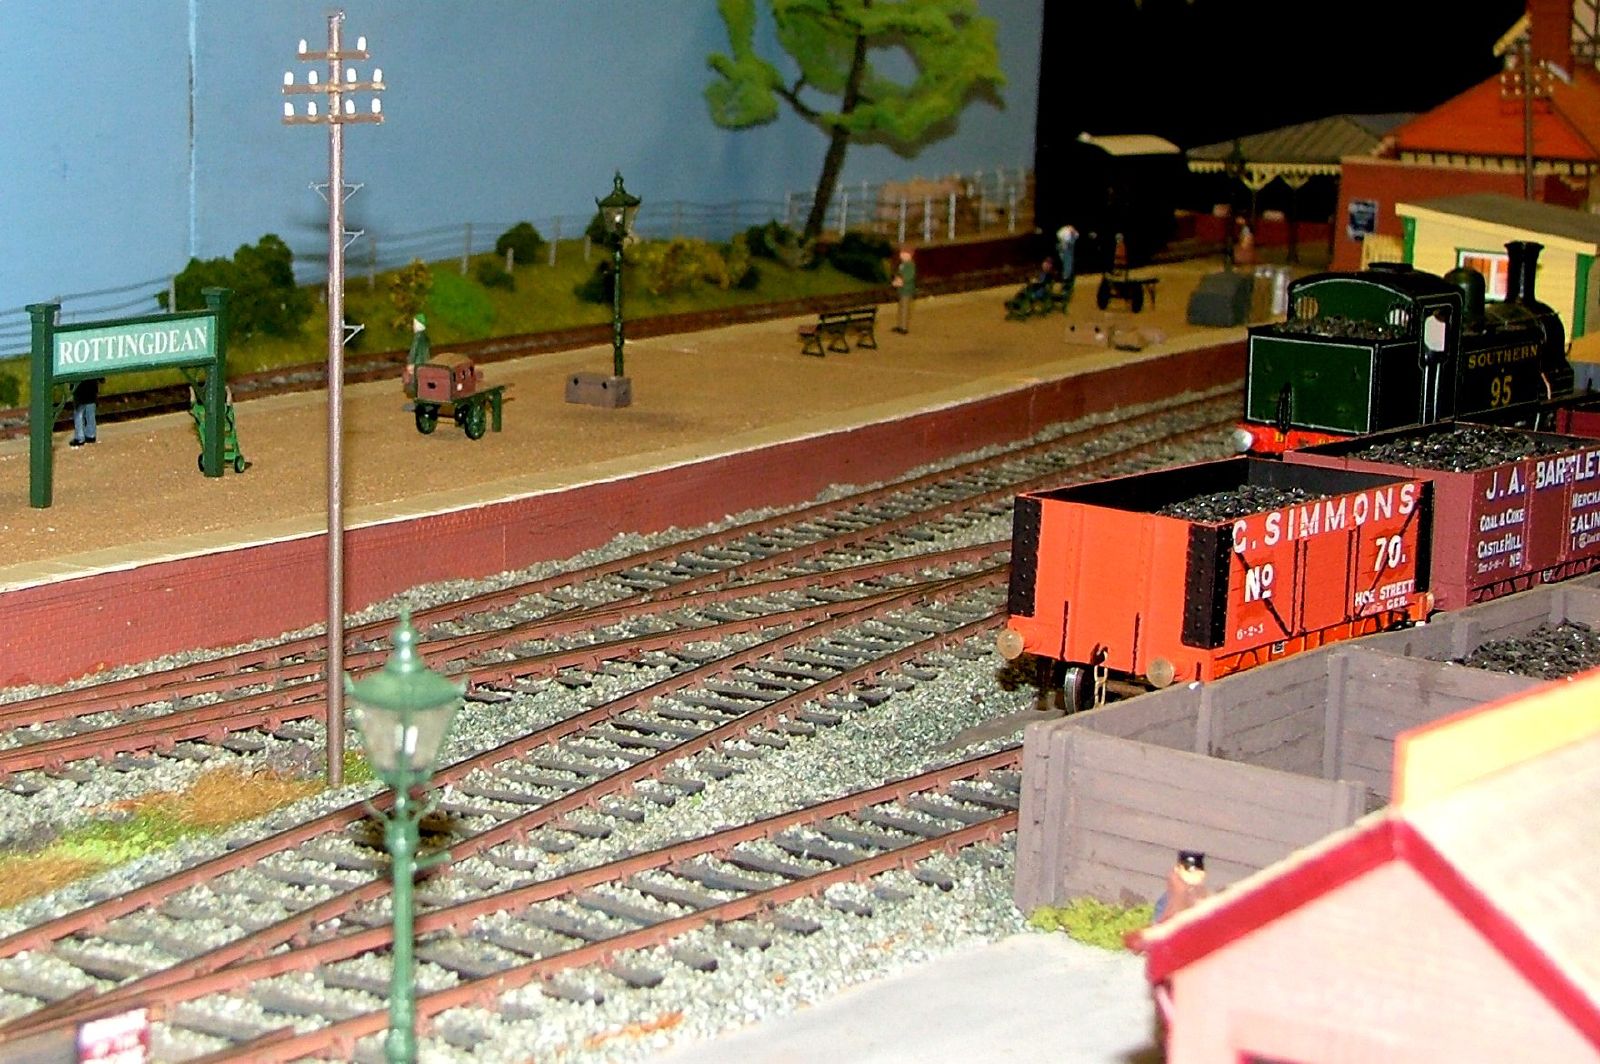 model train yard with trains and people walking near